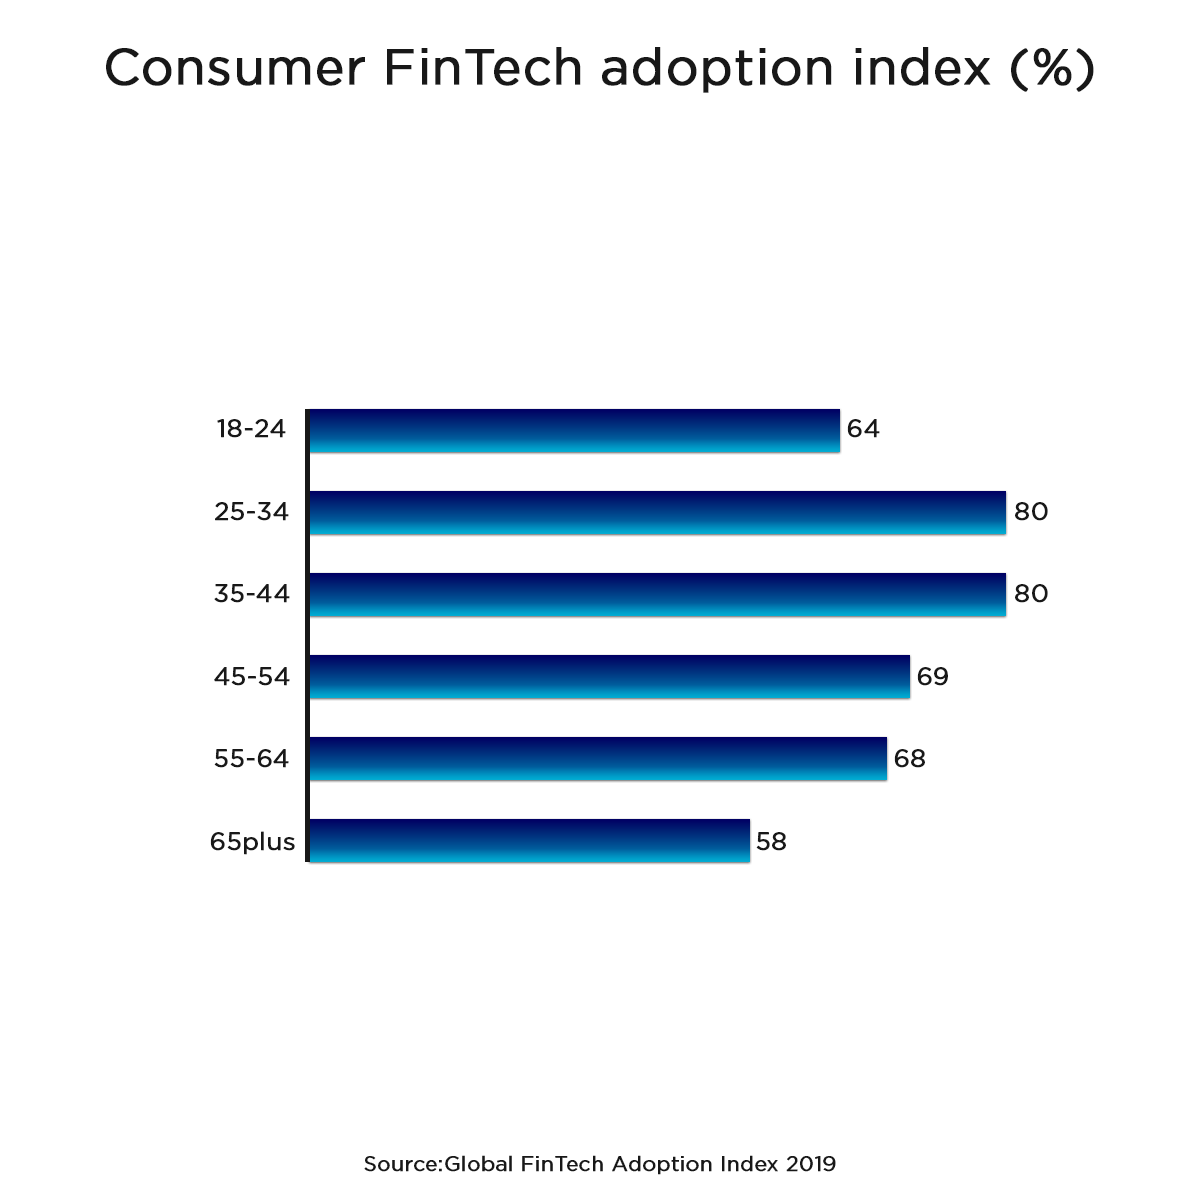 14% recorded in 2015 to the 71% adoption level of FinTech among the digitally engaged population in the UK in 2019.